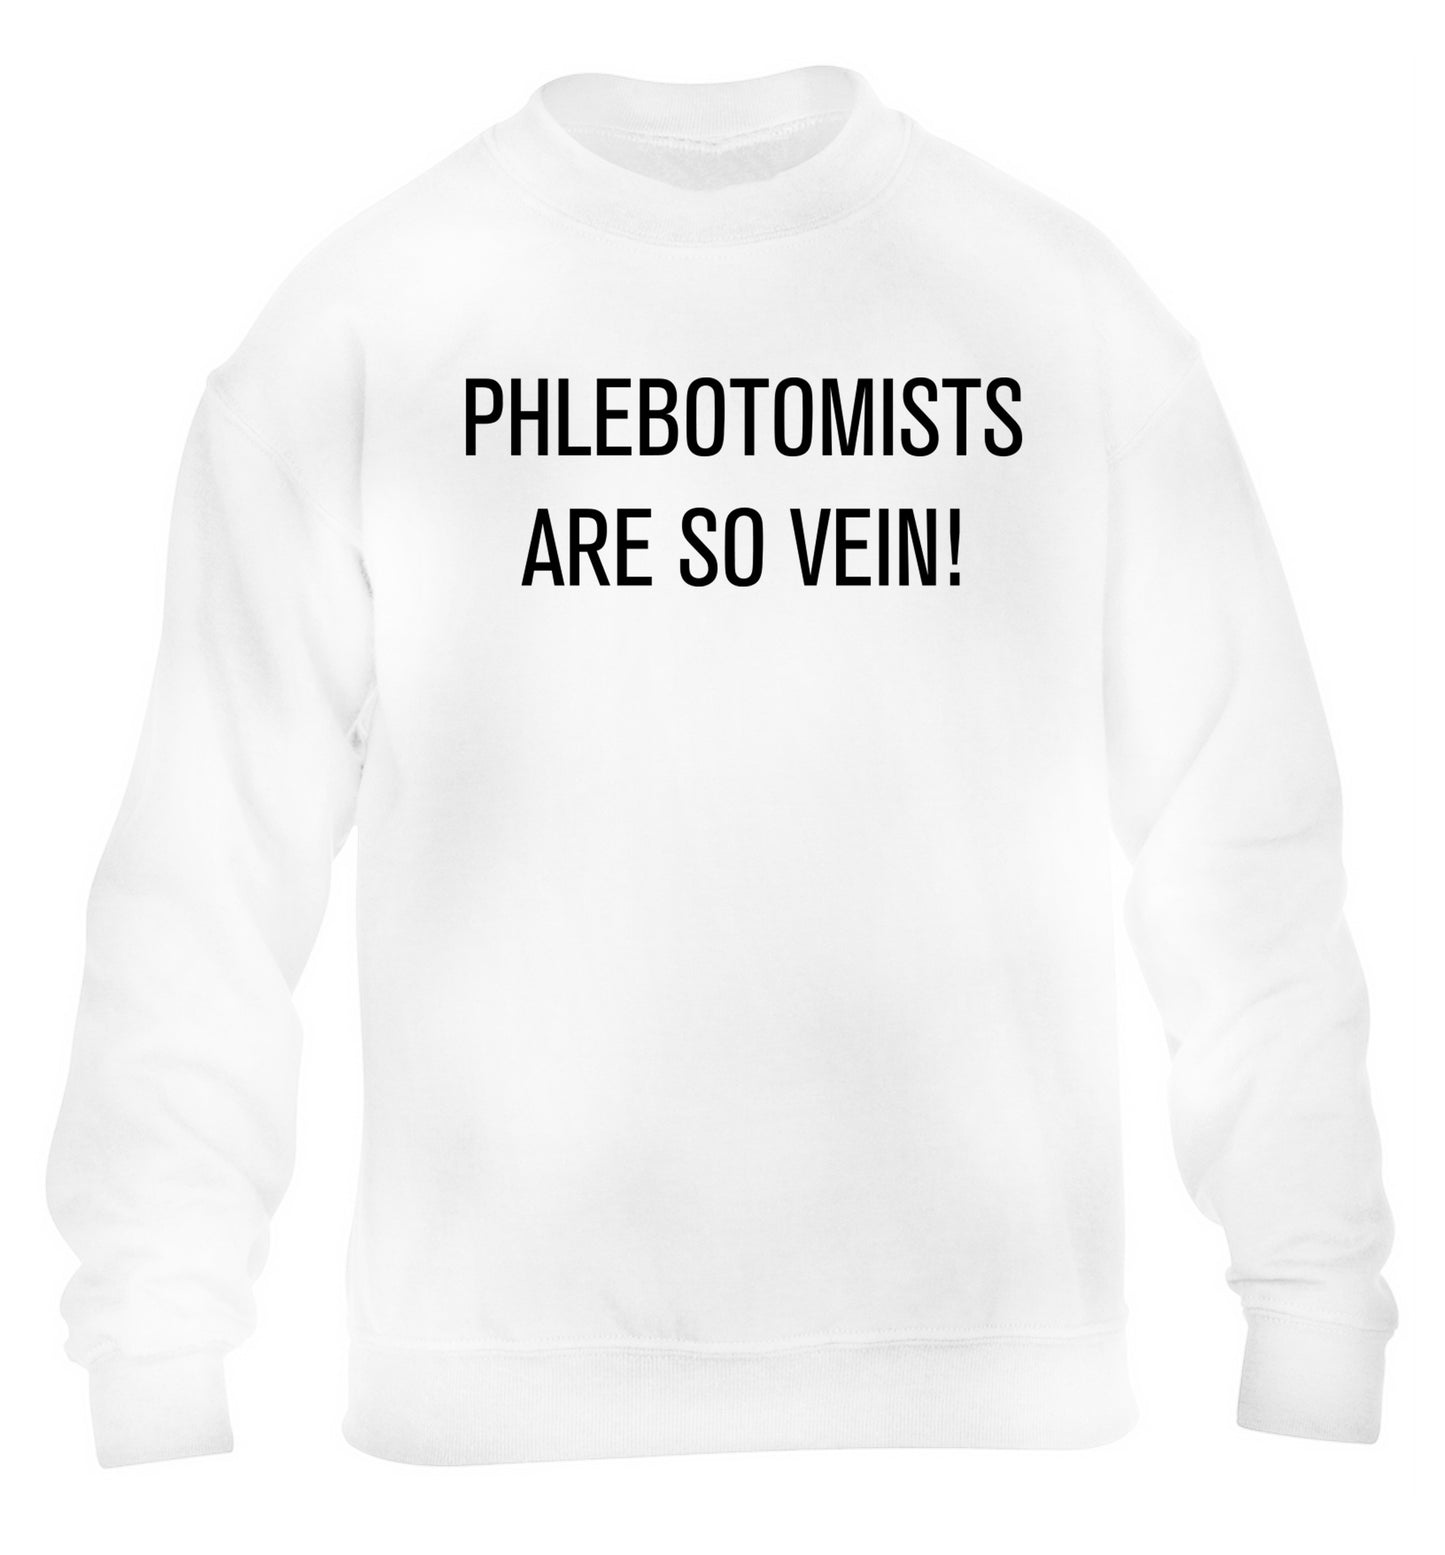 Phlebotomists are so vein! children's white sweater 12-14 Years